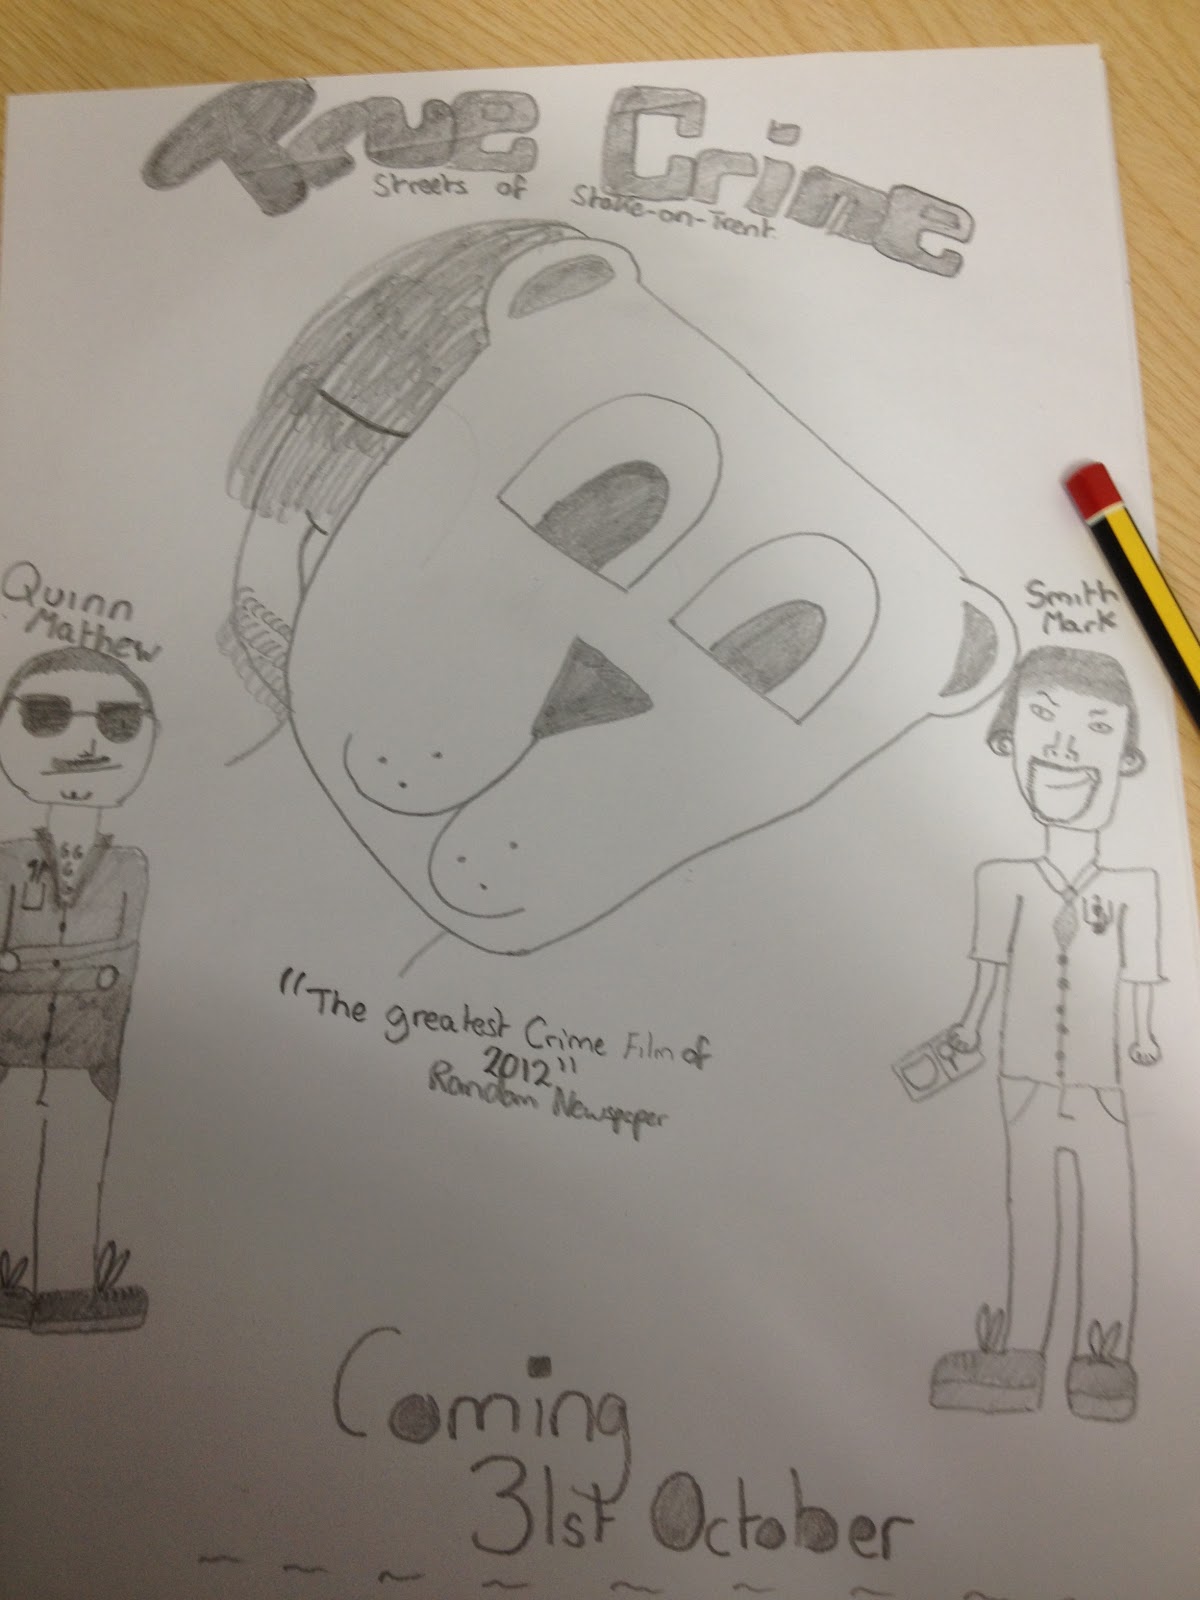 Media Studies A2 Coursework: Day 10.9.2: Planning - Movie Poster Design ...